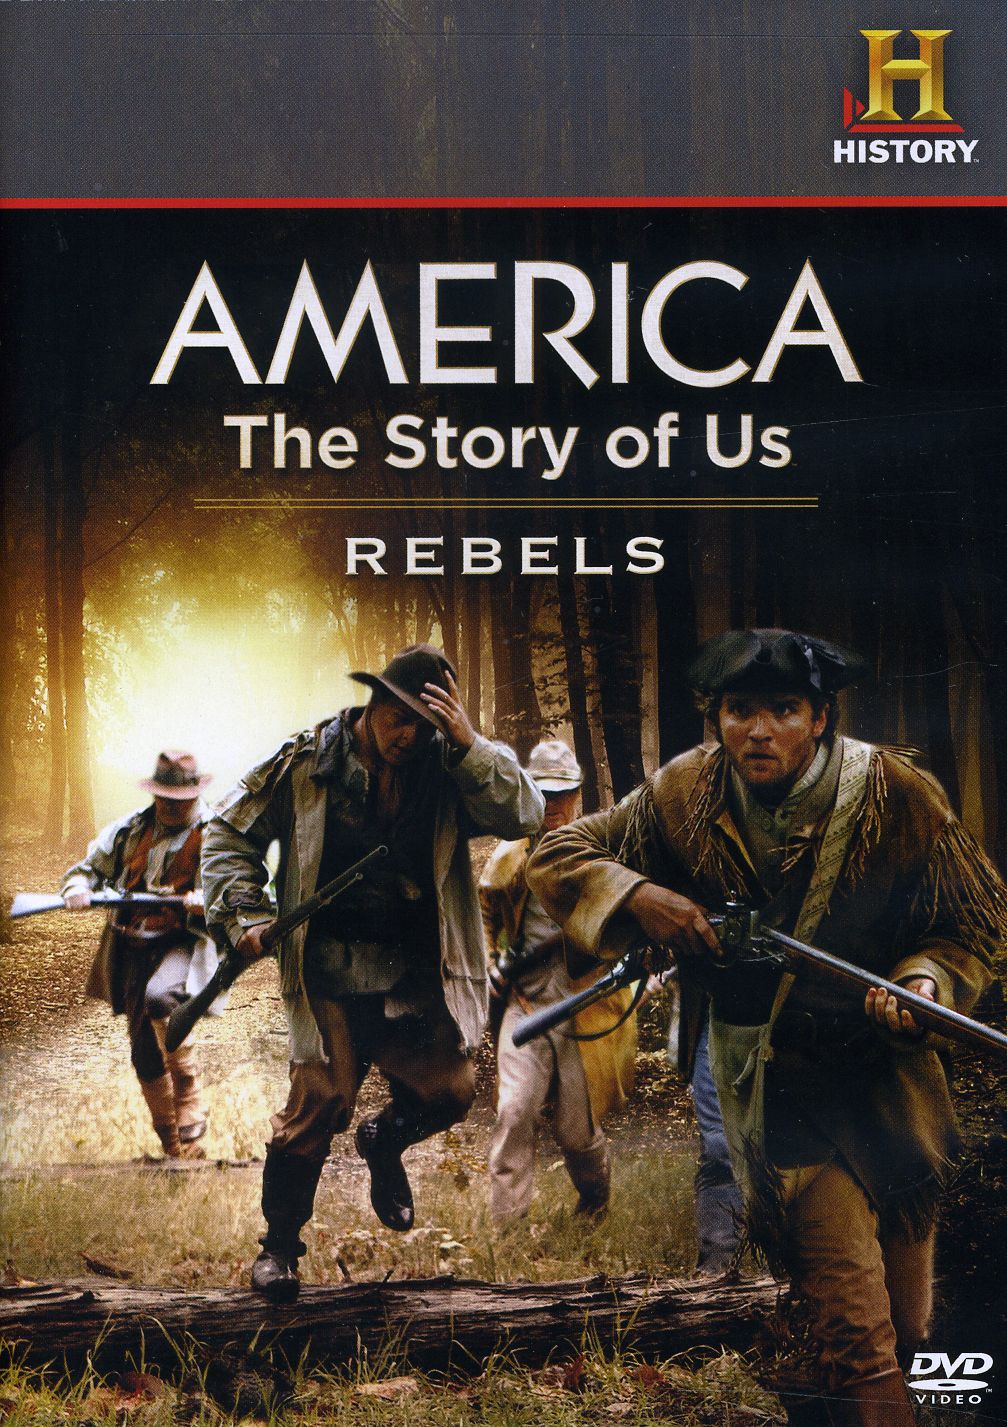 AMERICA THE STORY OF US: REBELS